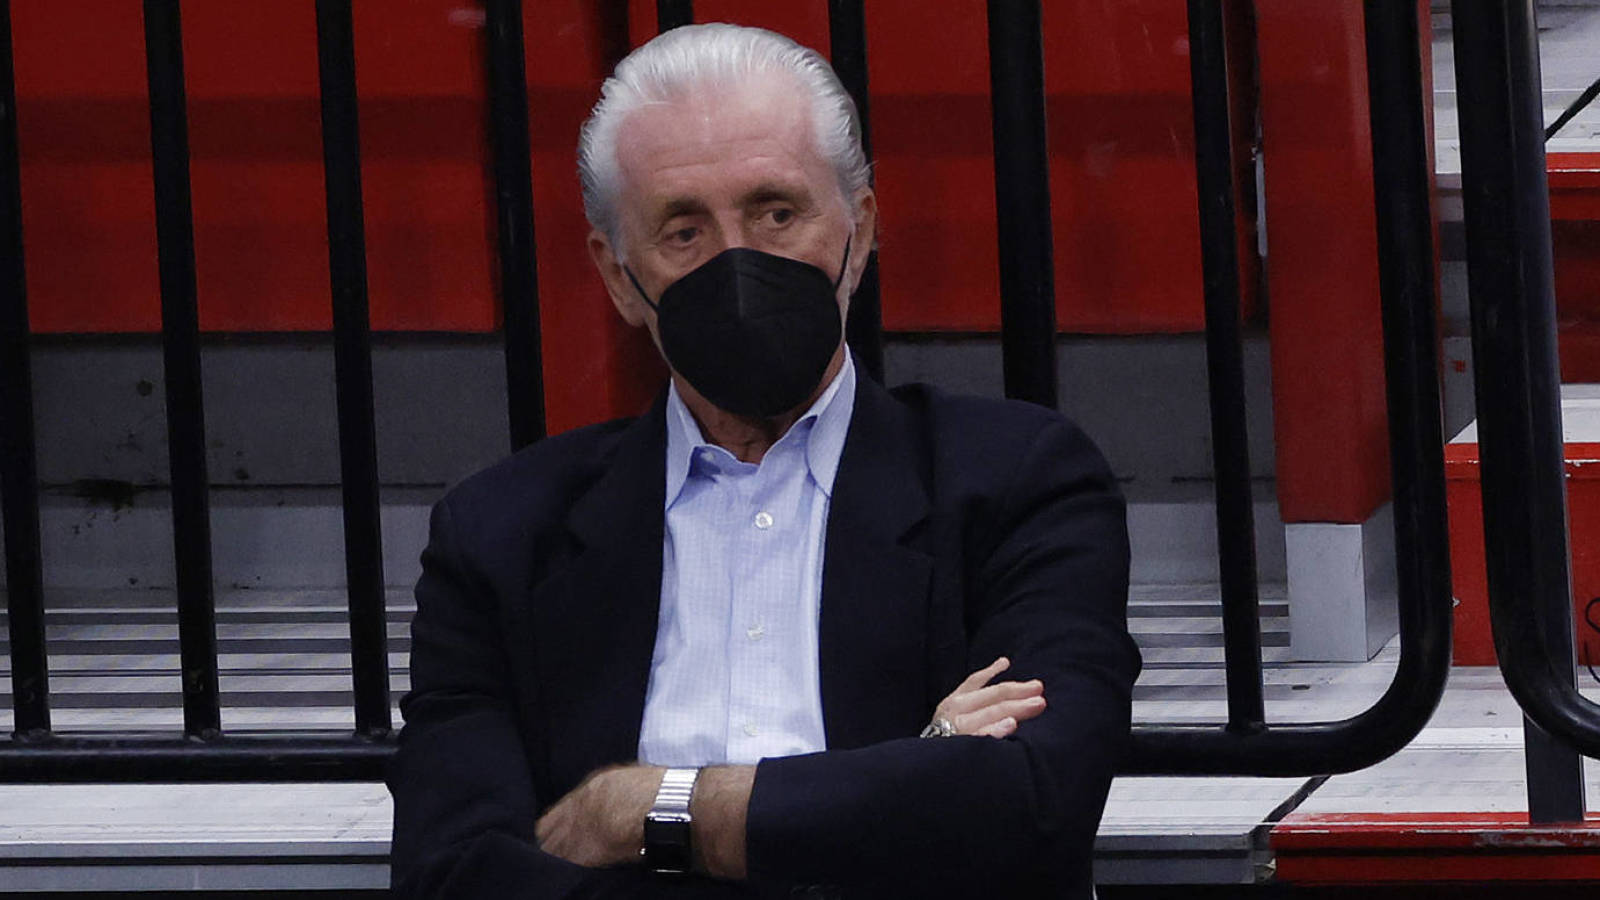 Heat president Pat Riley hit with $25K tampering fine for comments about LeBron James